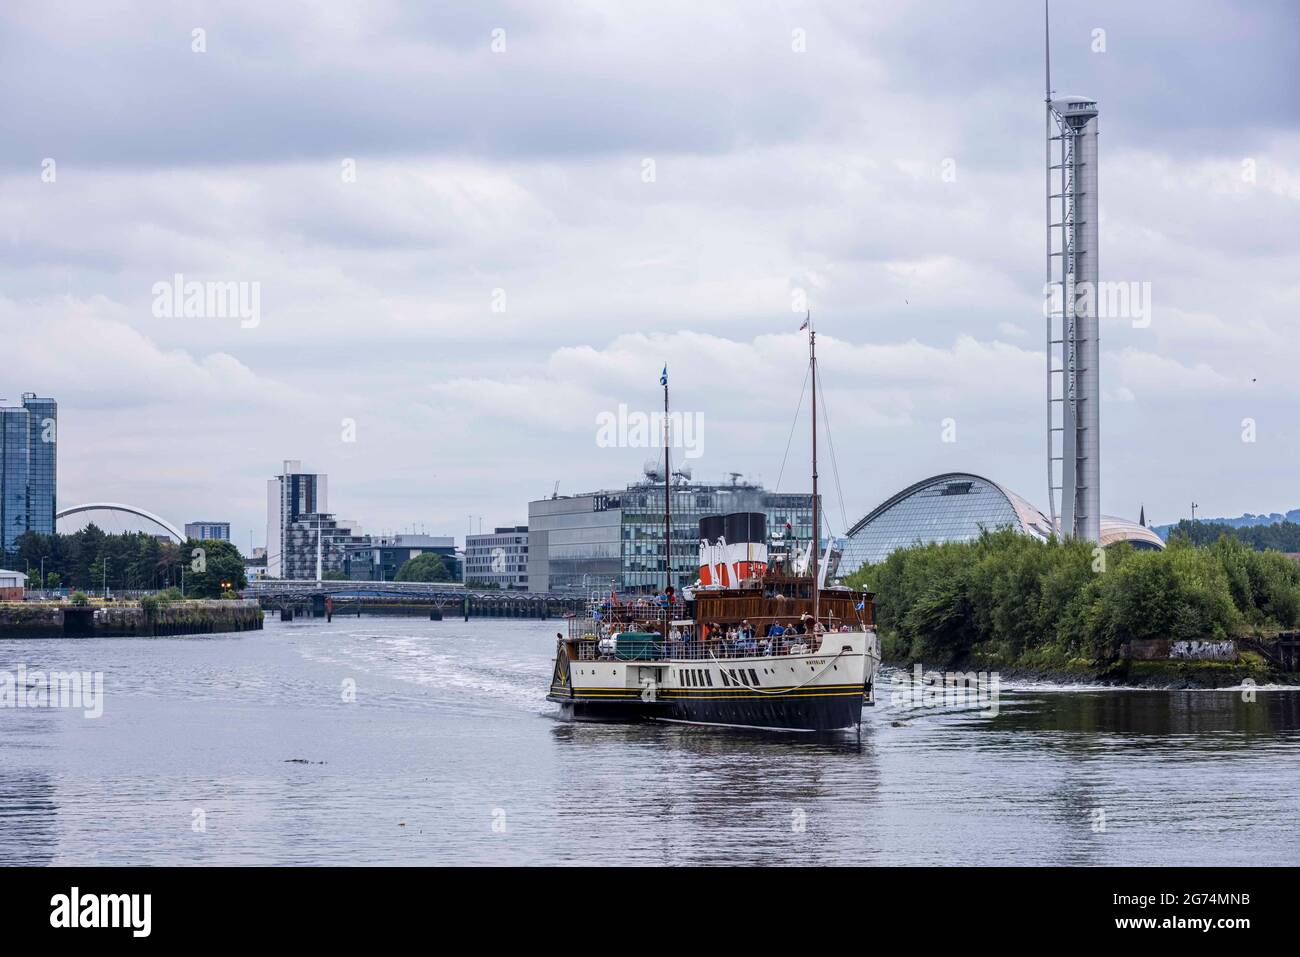 Glasgow, Scotland, UK. 11th July 2021. Pictured: The steamship Waverley leaves Glasgow at the start of its daily trip around the Clyde estuary. Credit: Rich Dyson/Alamy Live News Stock Photo